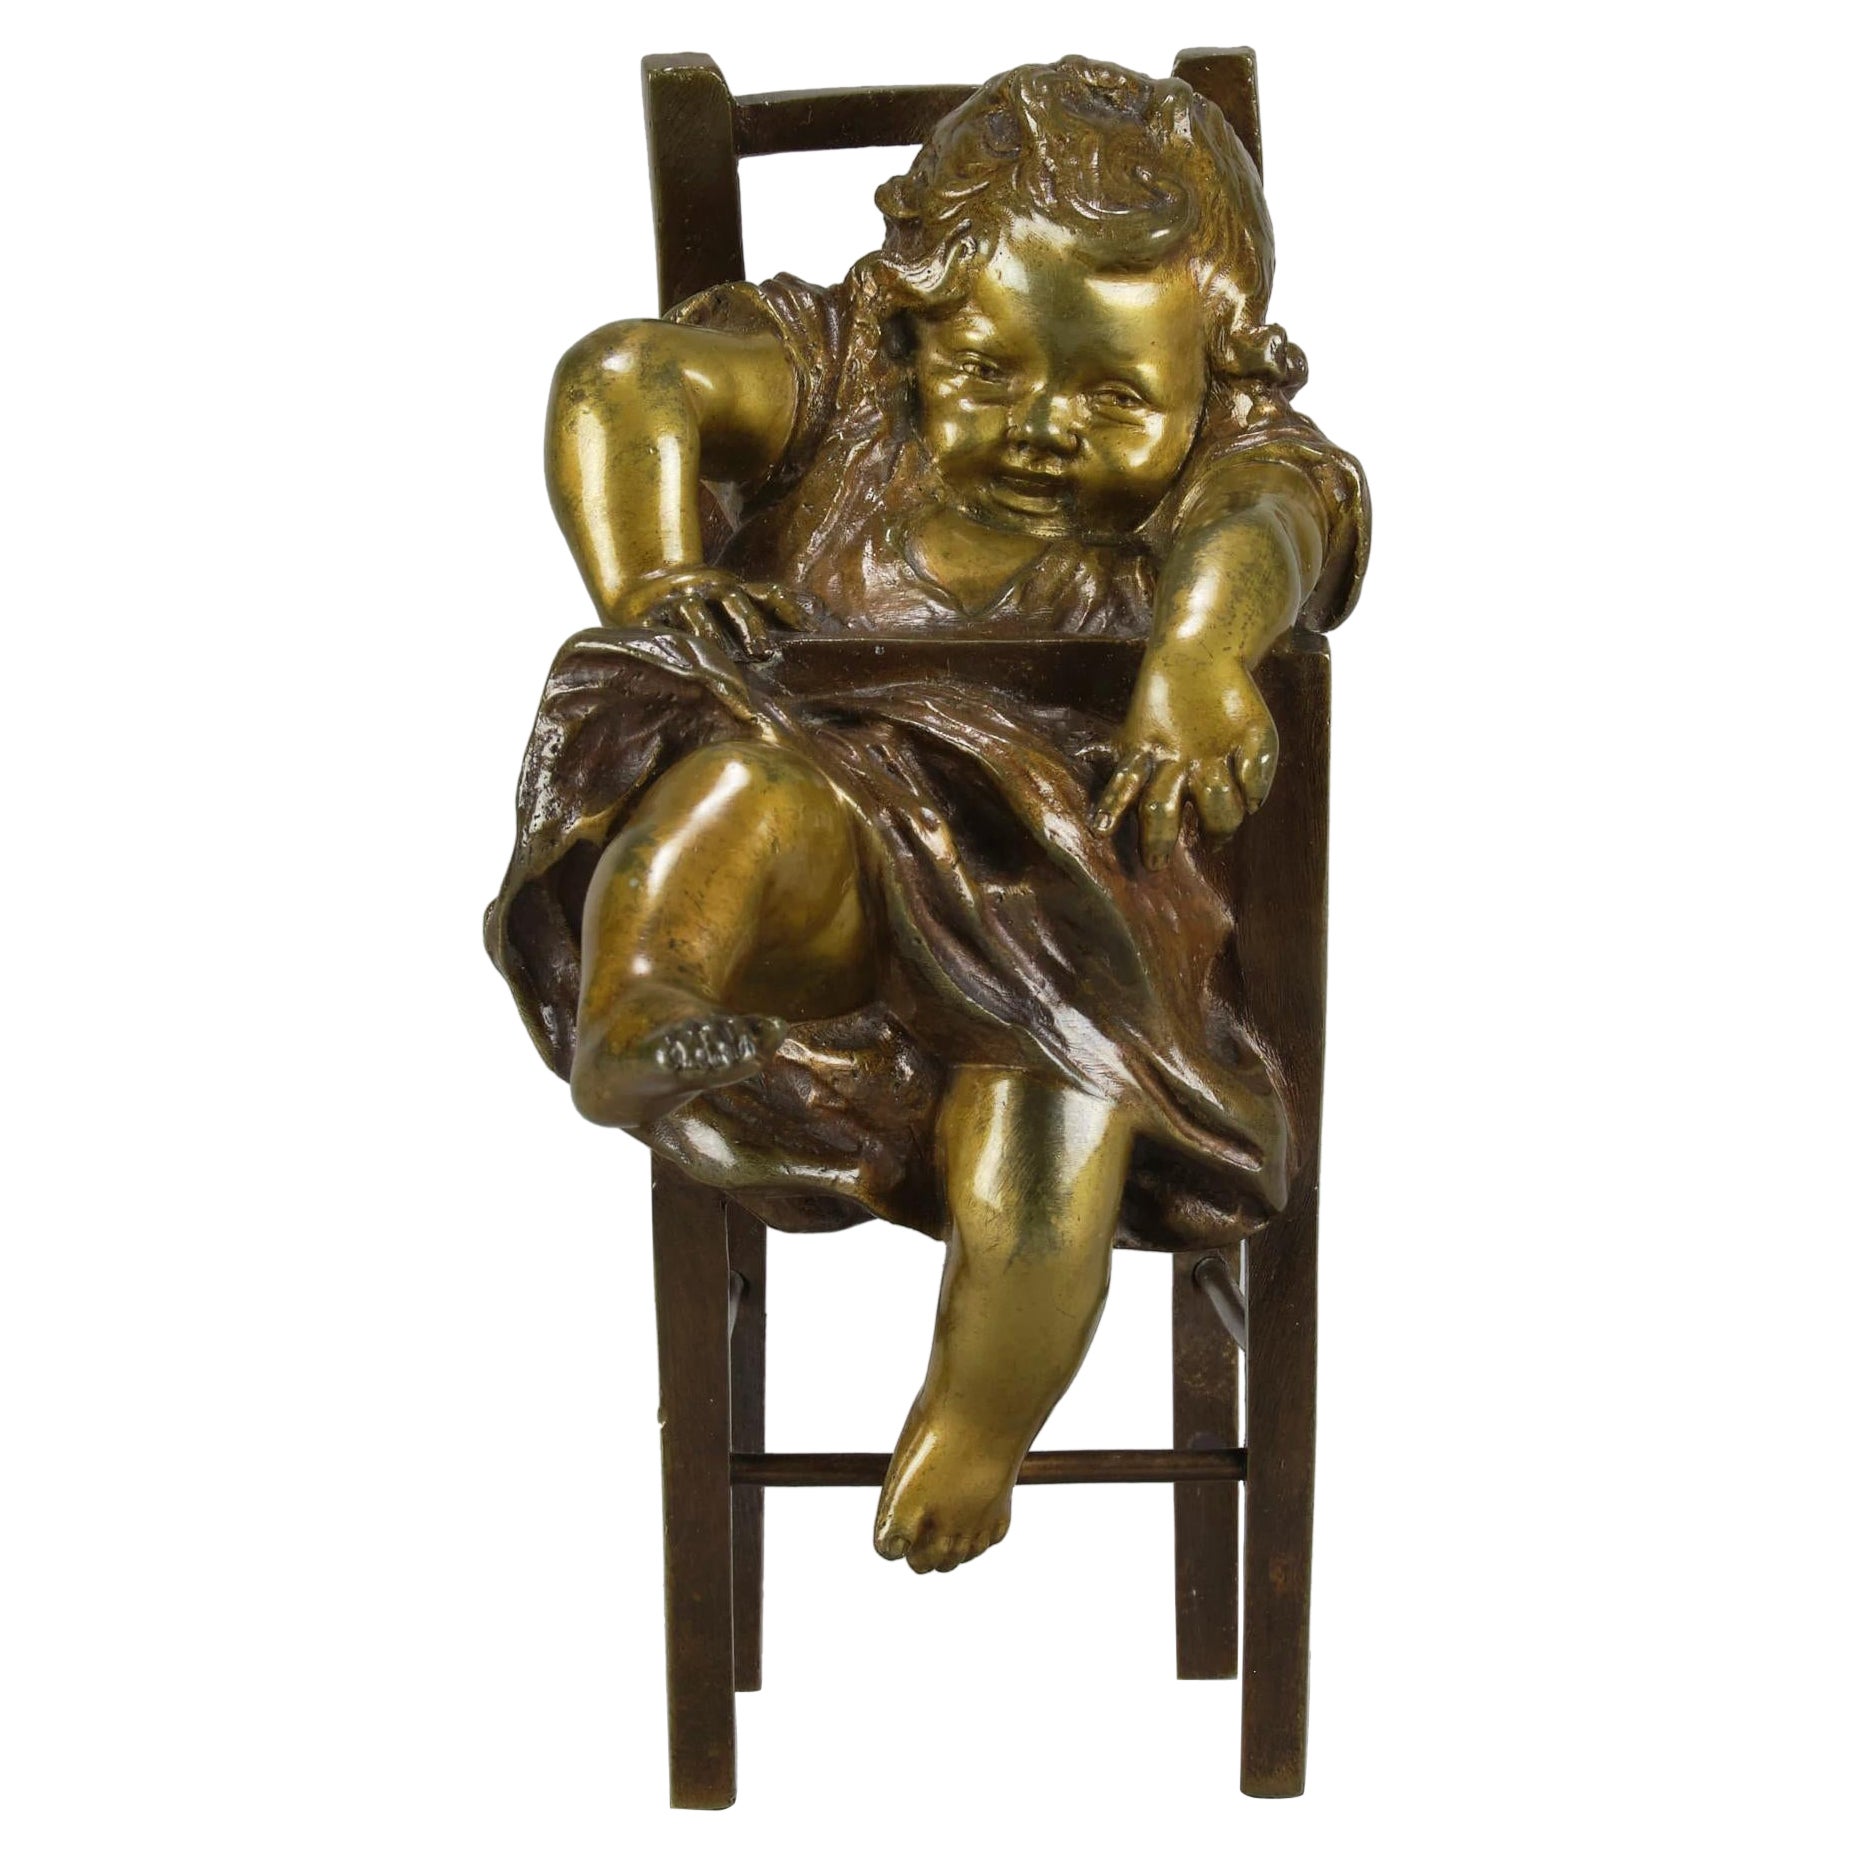 Early 20th Century Spanish Bronze Entitled "Girl on Chair" by Juan Clara For Sale